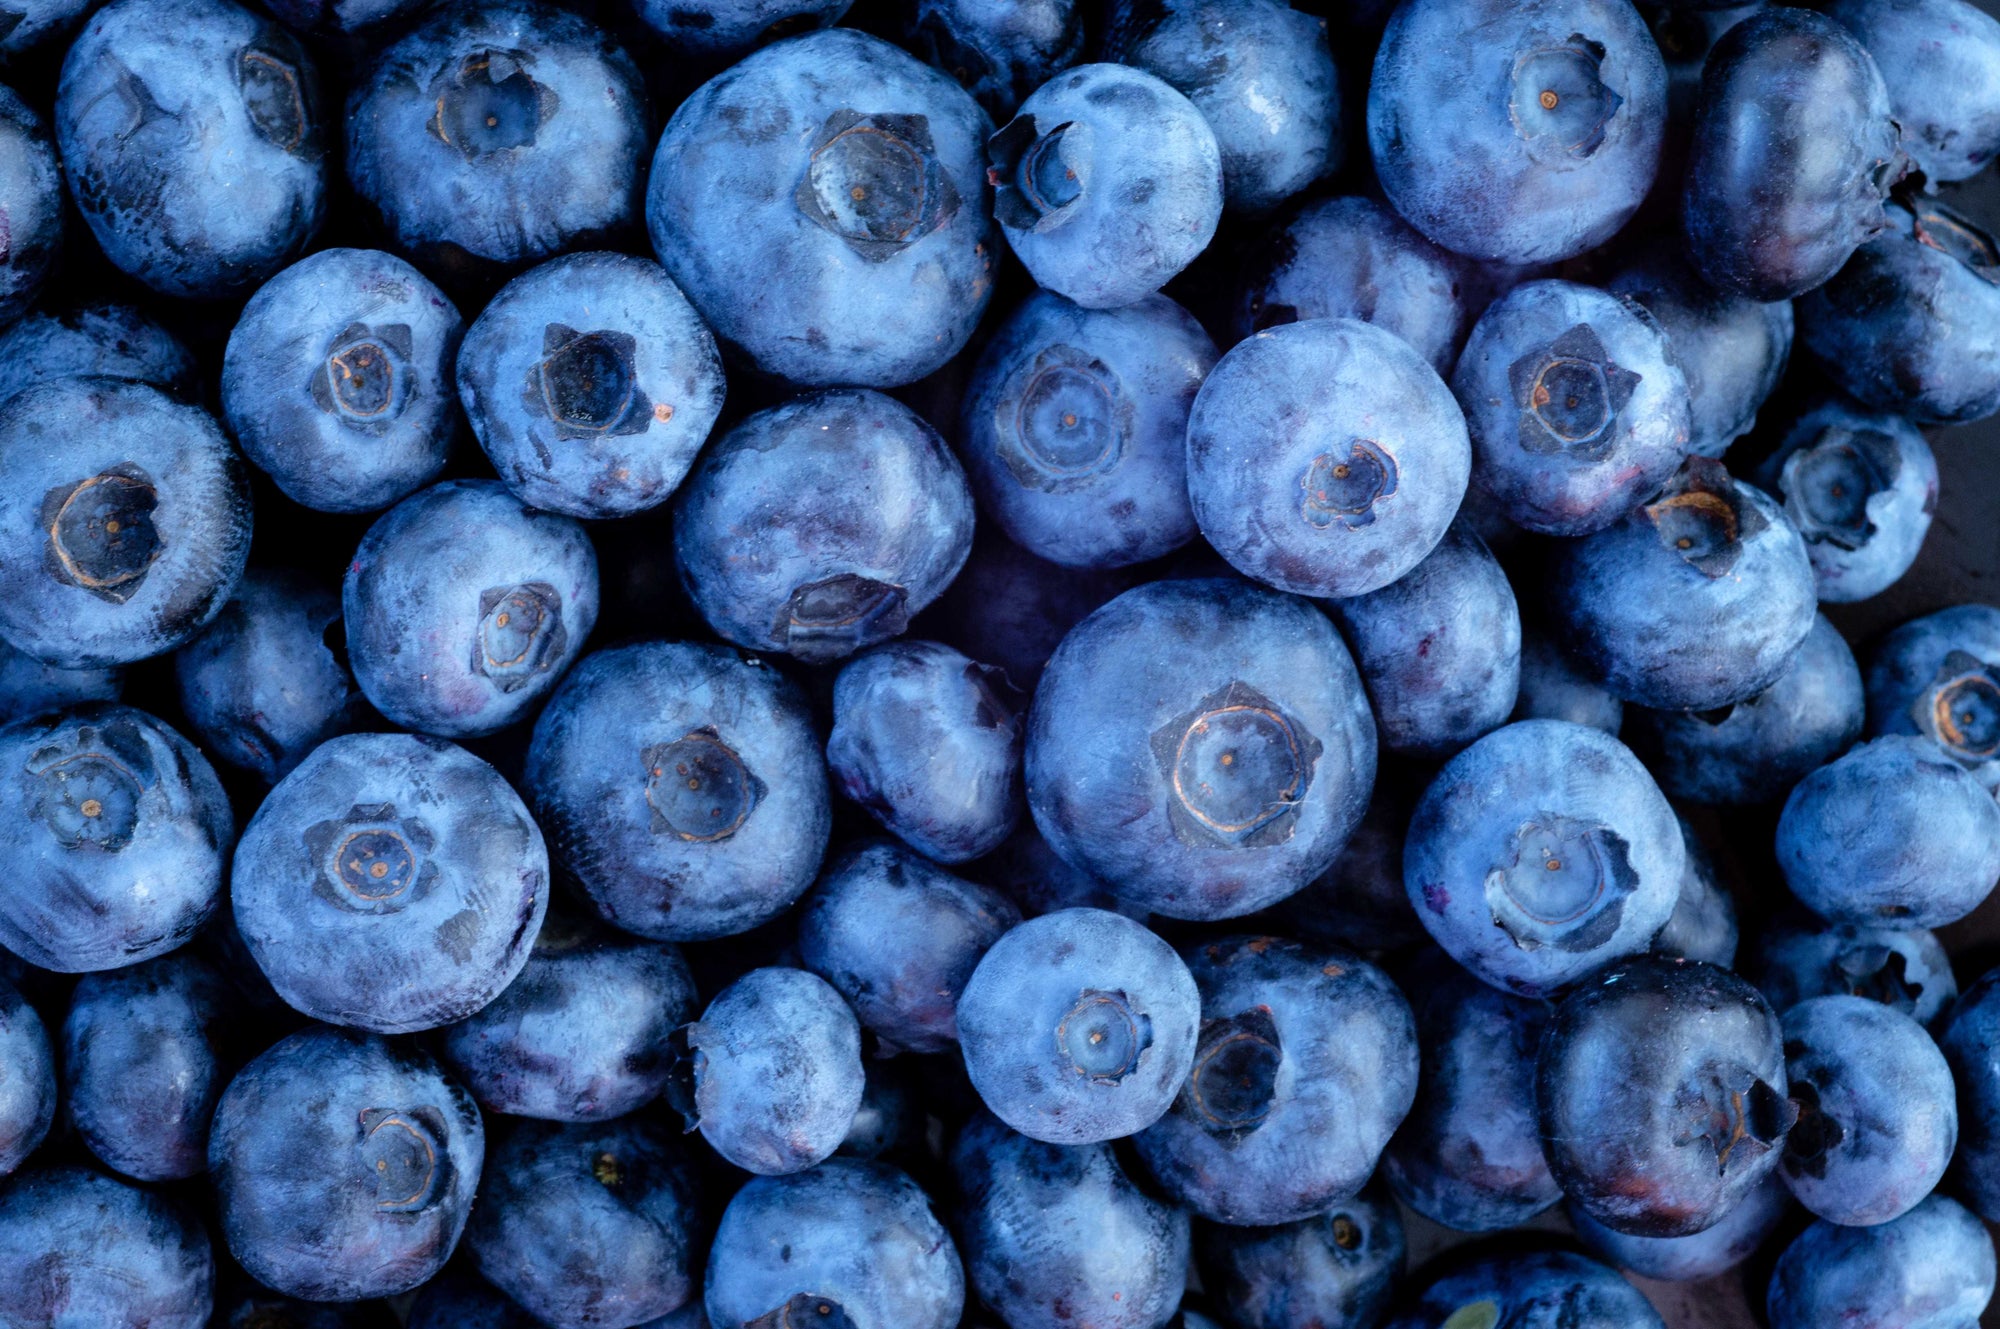 Nutritional Benefits of Blueberries